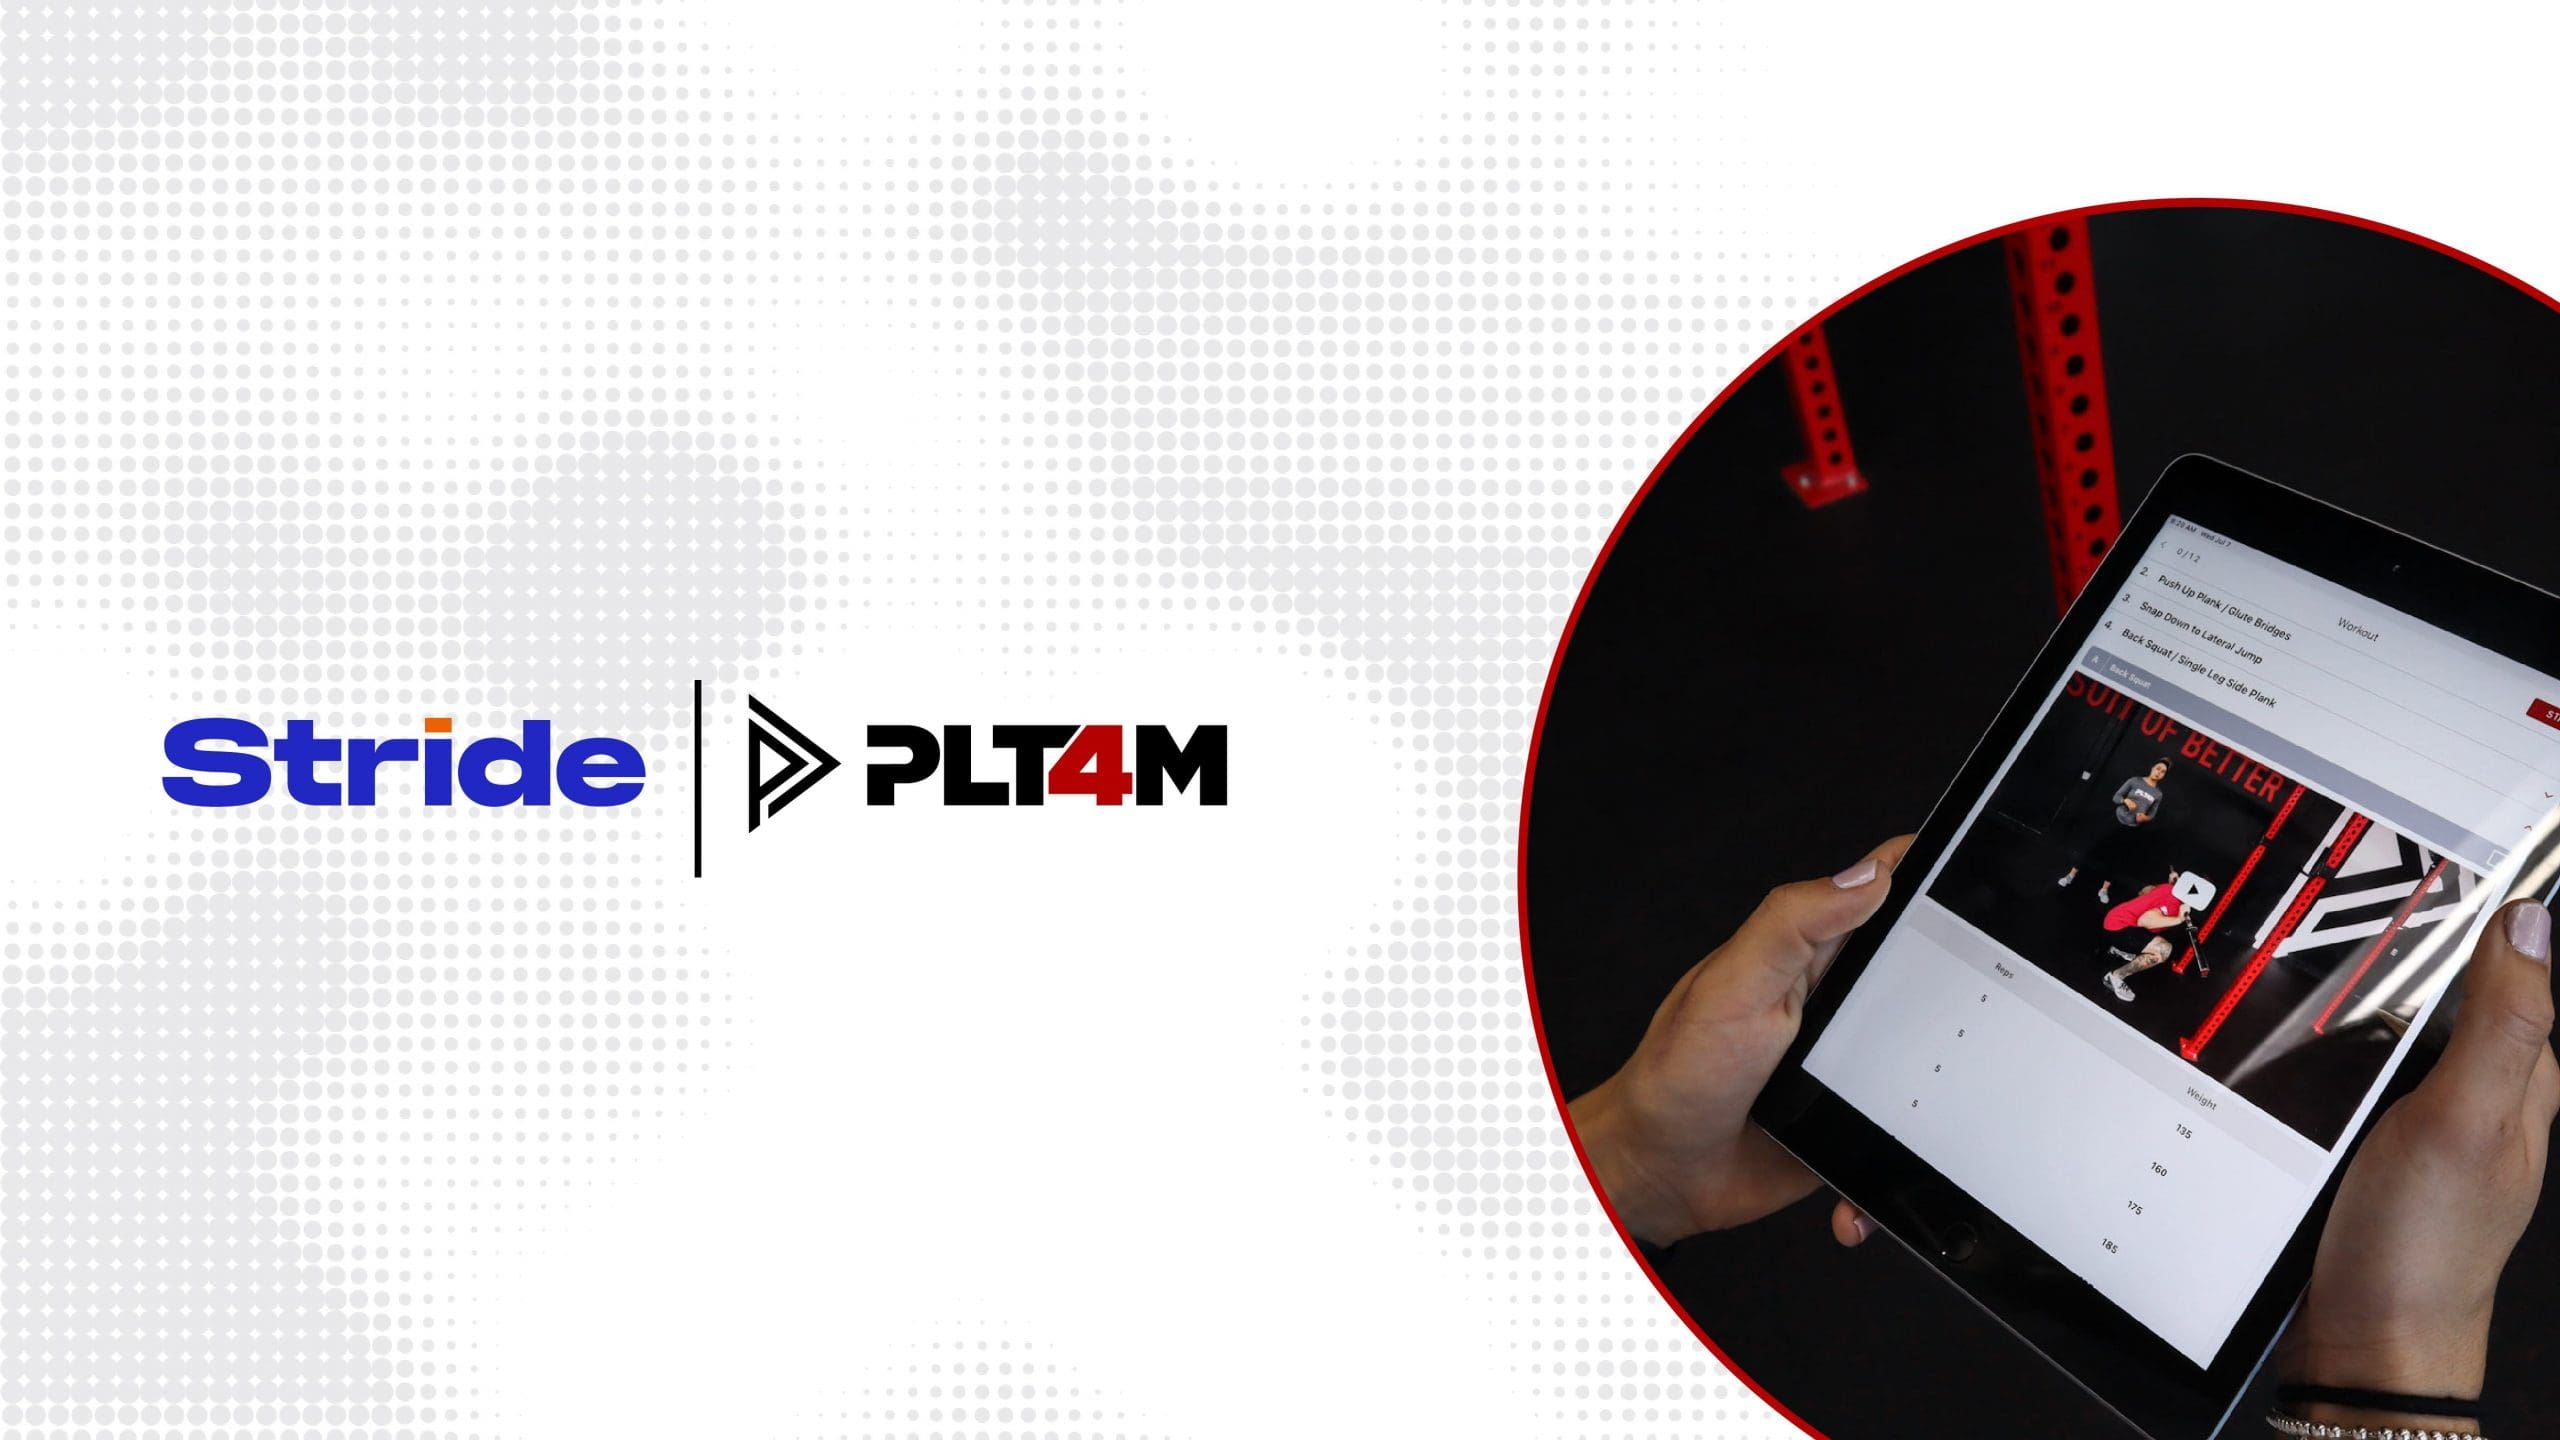 Stride and PLT4M partnership cover photo.